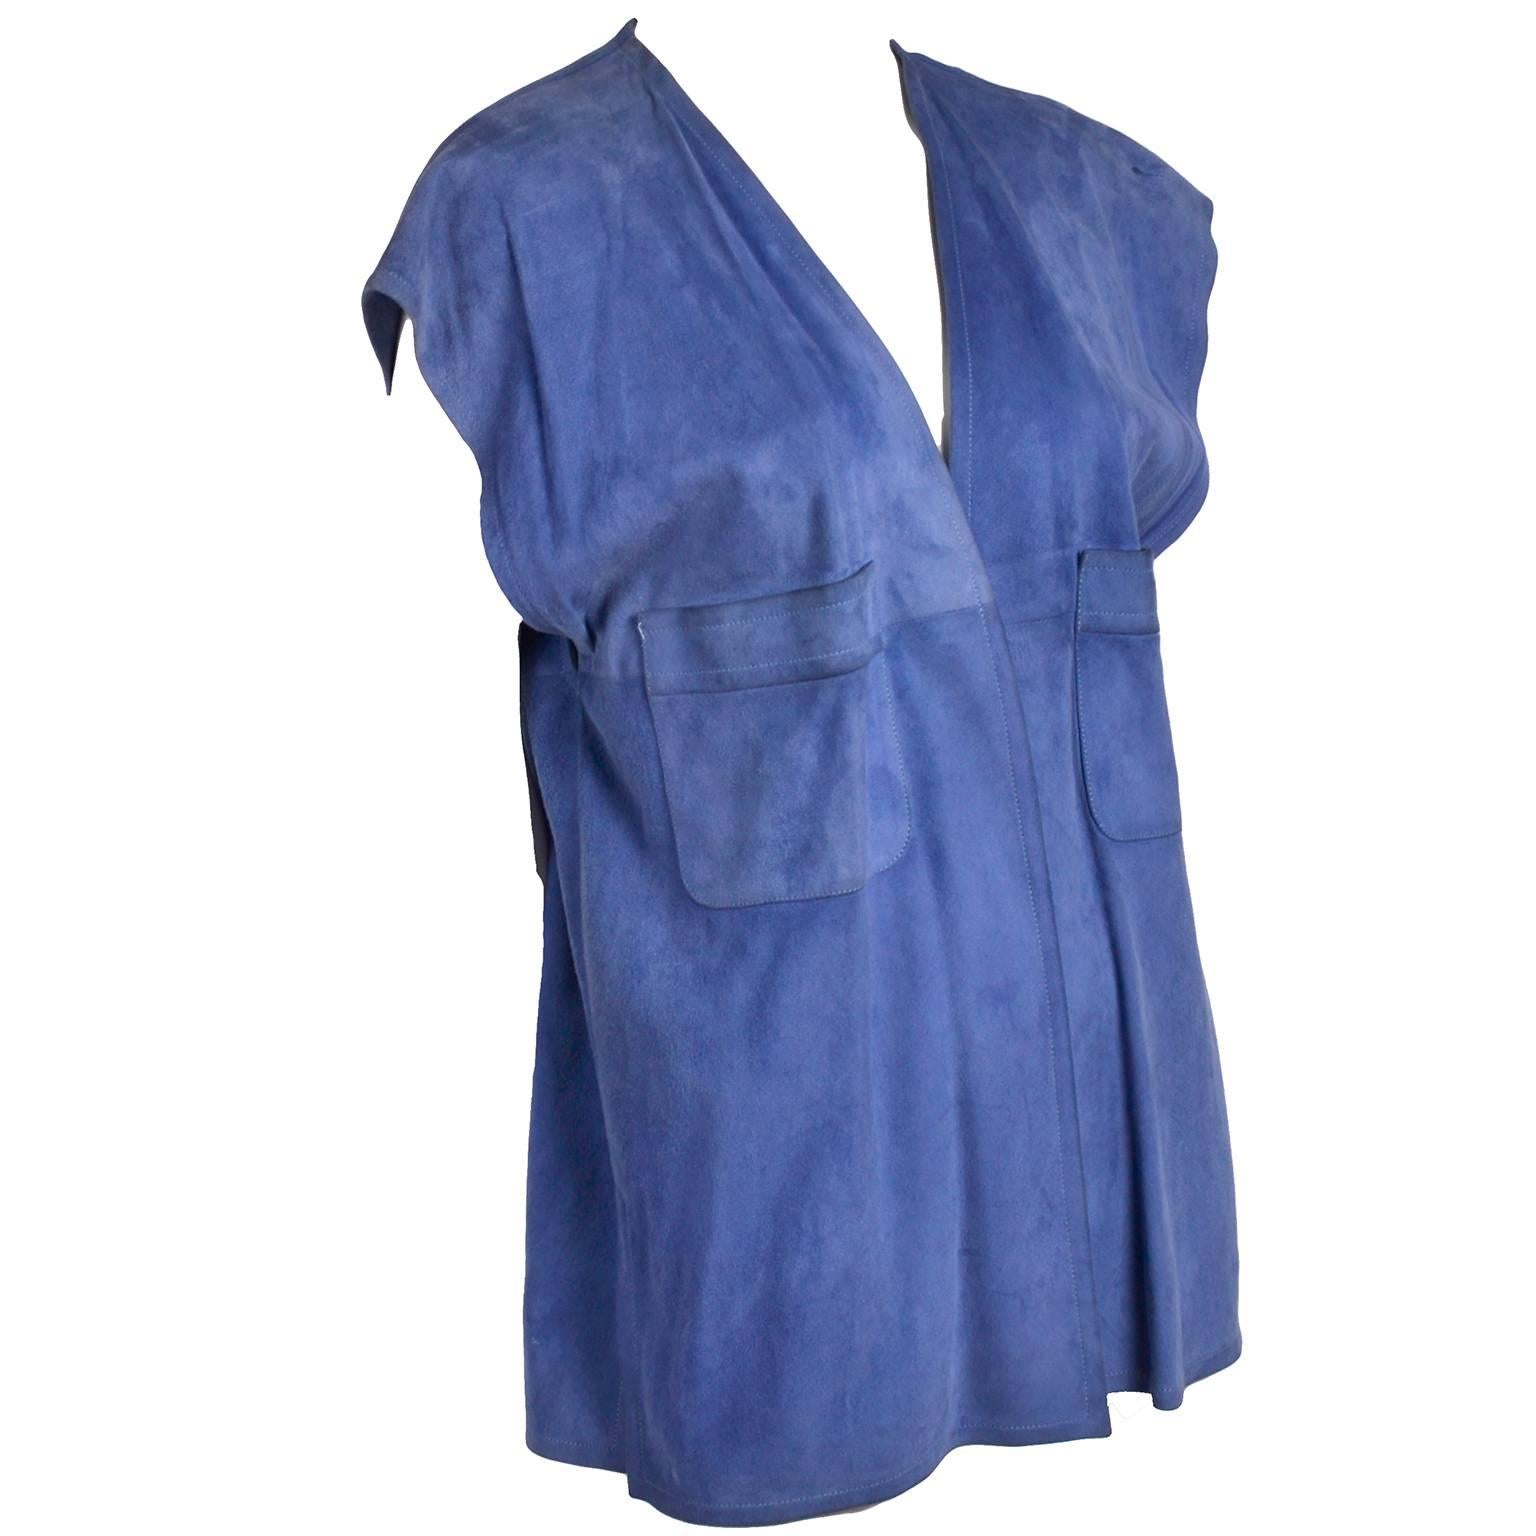 This is a great 1970's vintage Gucci blue suede open front vest with two breast pockets. This sleeveless top has no closures, and was made in Italy. It is in very good condition, with natural darkening to the leather along some edges. It has a slit